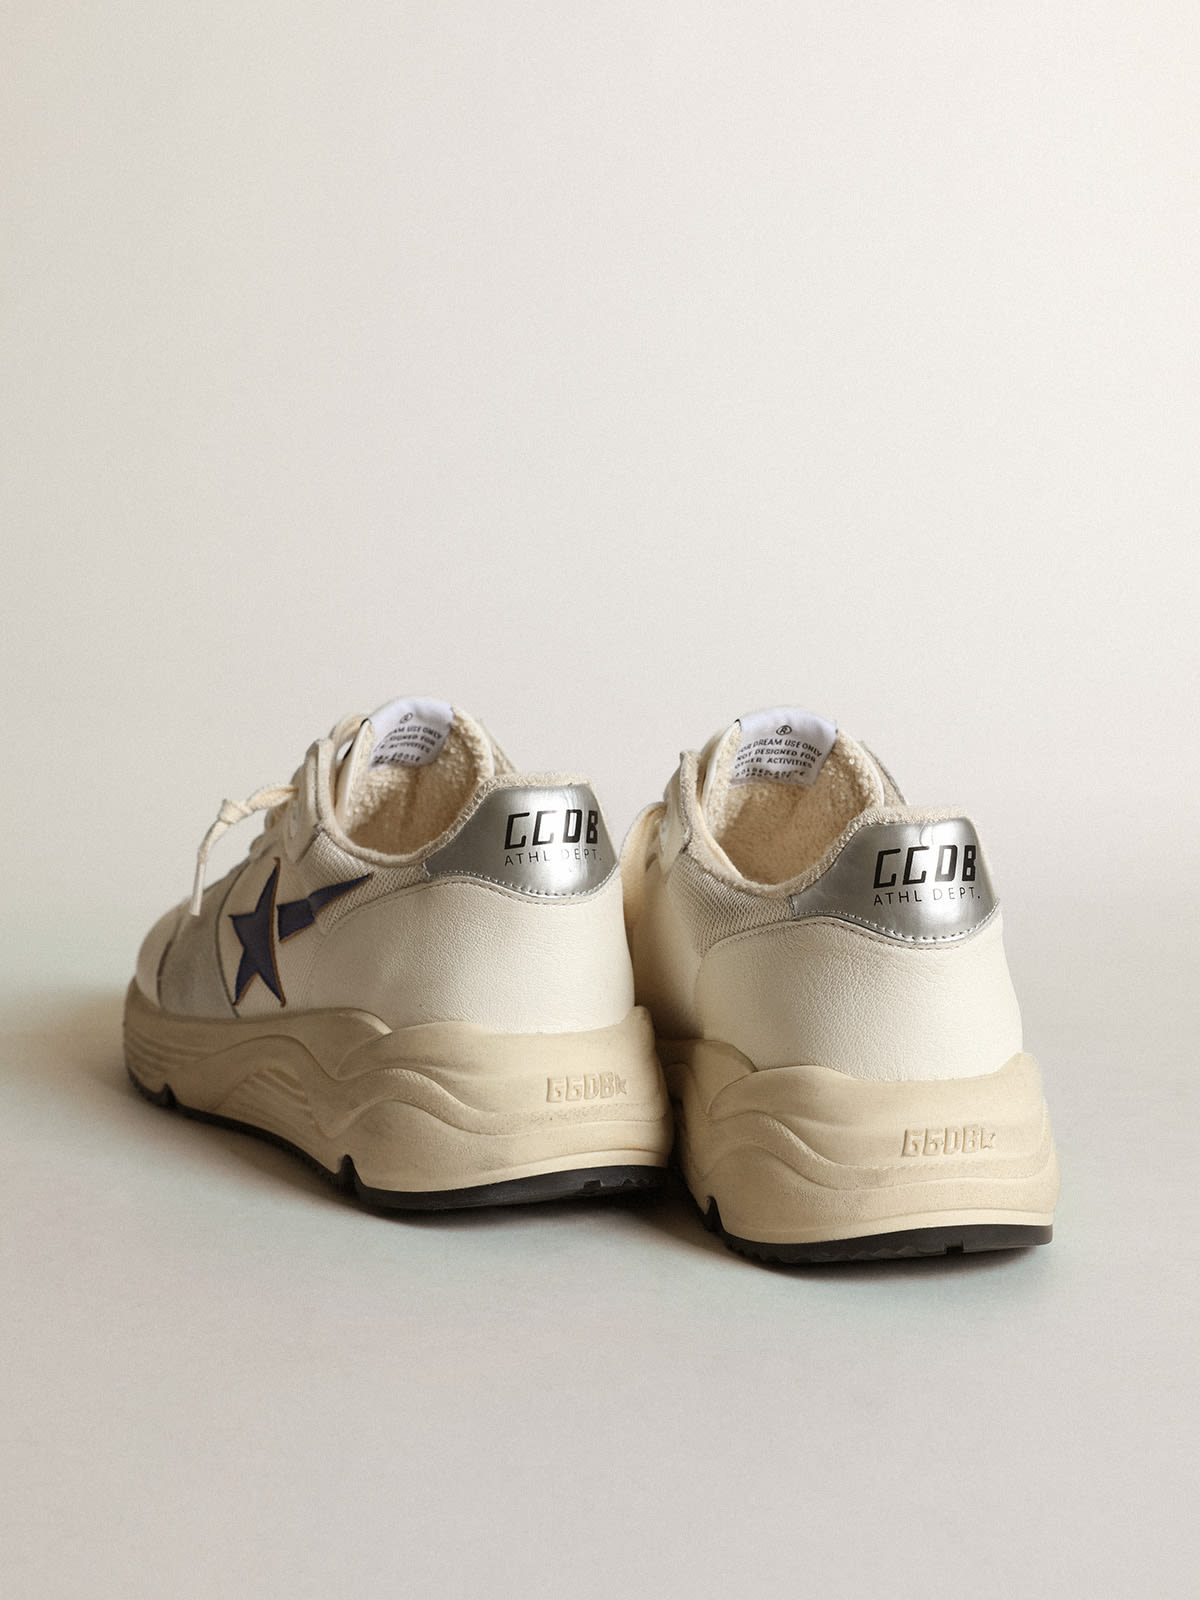 Golden Goose - Running Sole in white mesh and nappa leather with a blue star in 